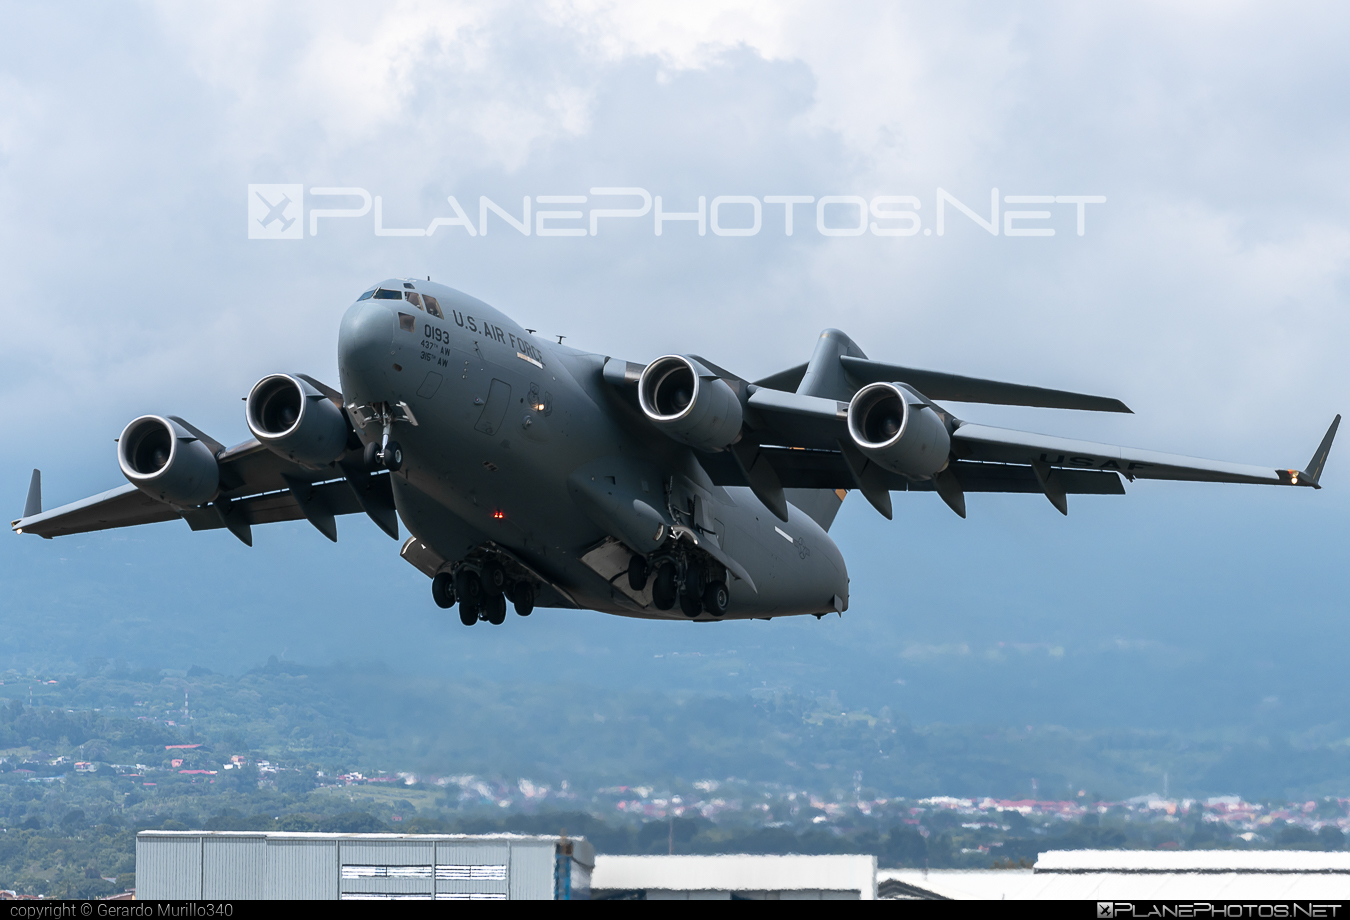 Boeing C-17A Globemaster III - 01-0193 operated by US Air Force (USAF) #boeing #c17 #c17globemaster #globemaster #globemasteriii #usaf #usairforce